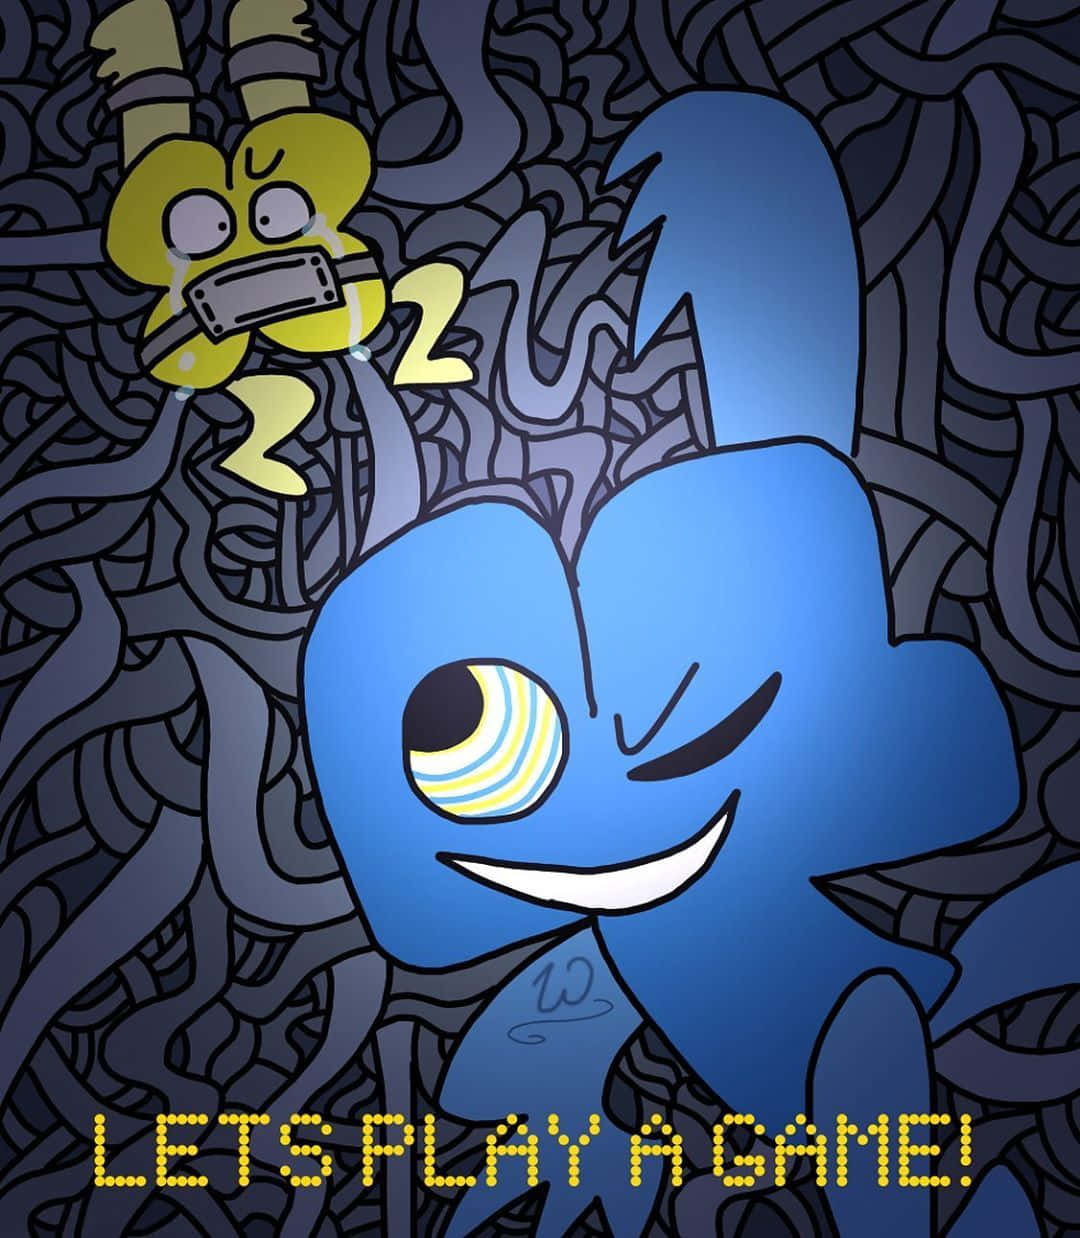 BFB Four wallpaper wallpaper by networkcatYT  Download on ZEDGE  56e7